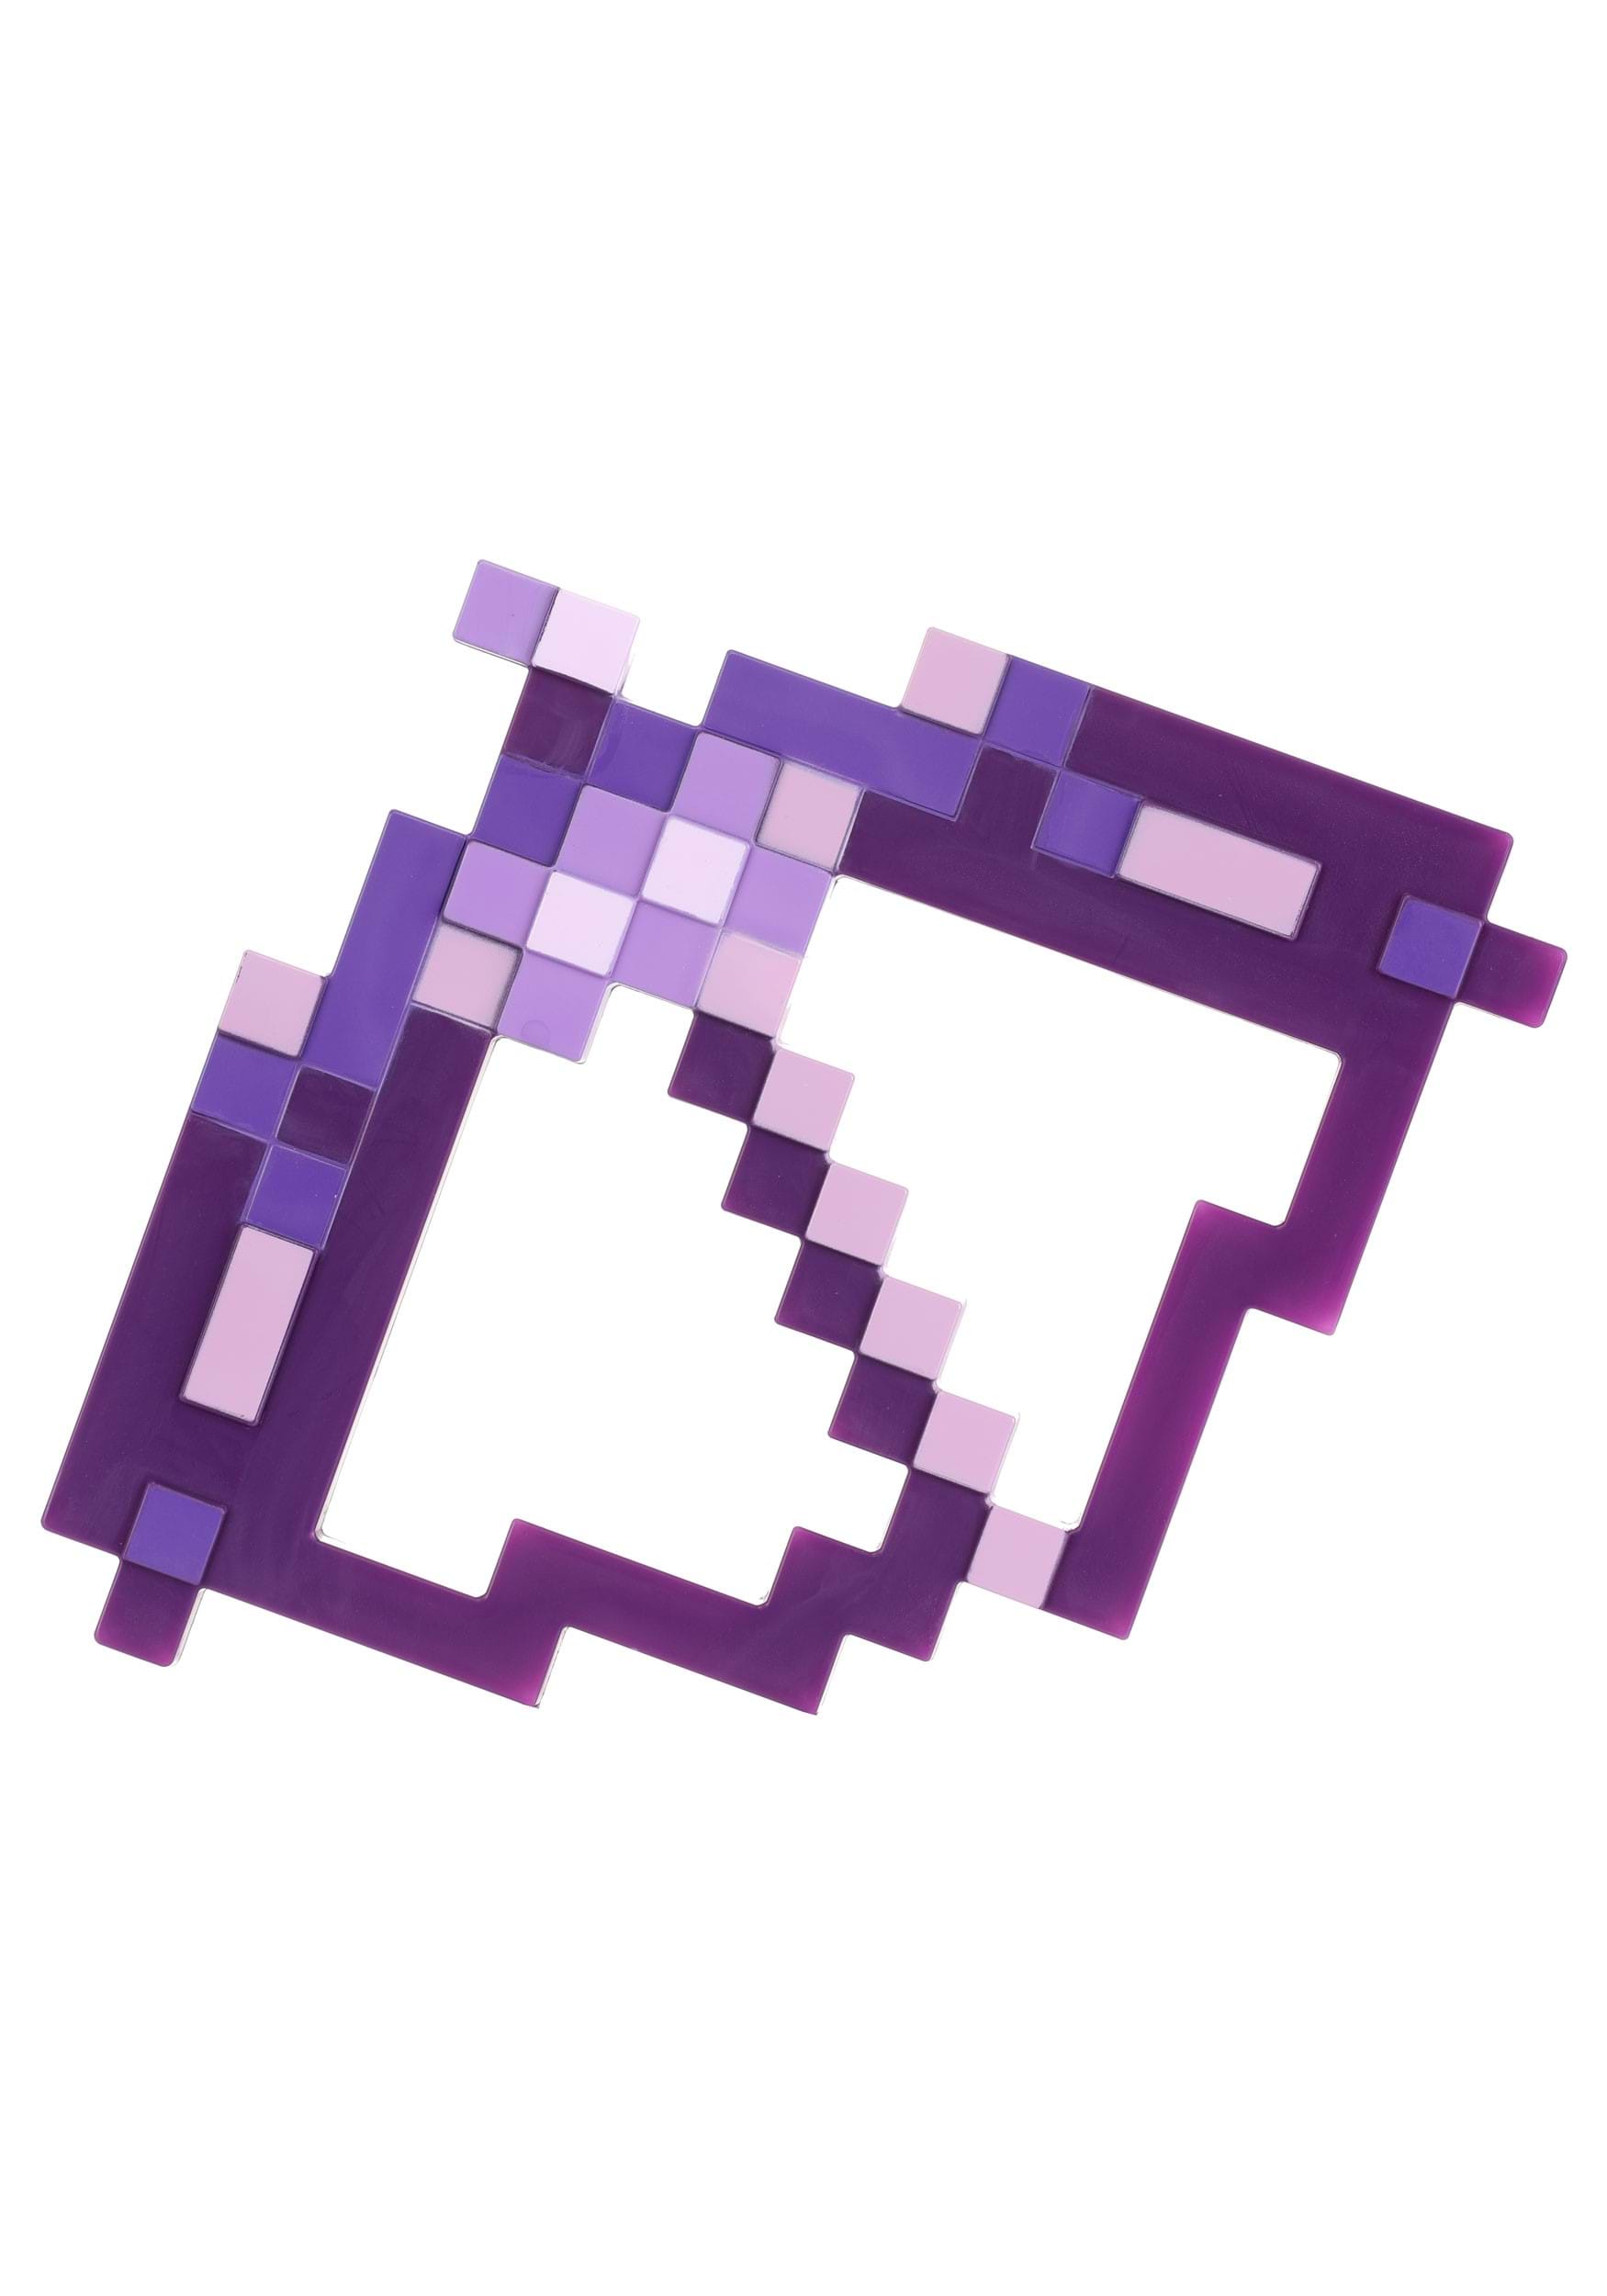  Disguise Minecraft Toy Weapon, Enchanted Purple Sword